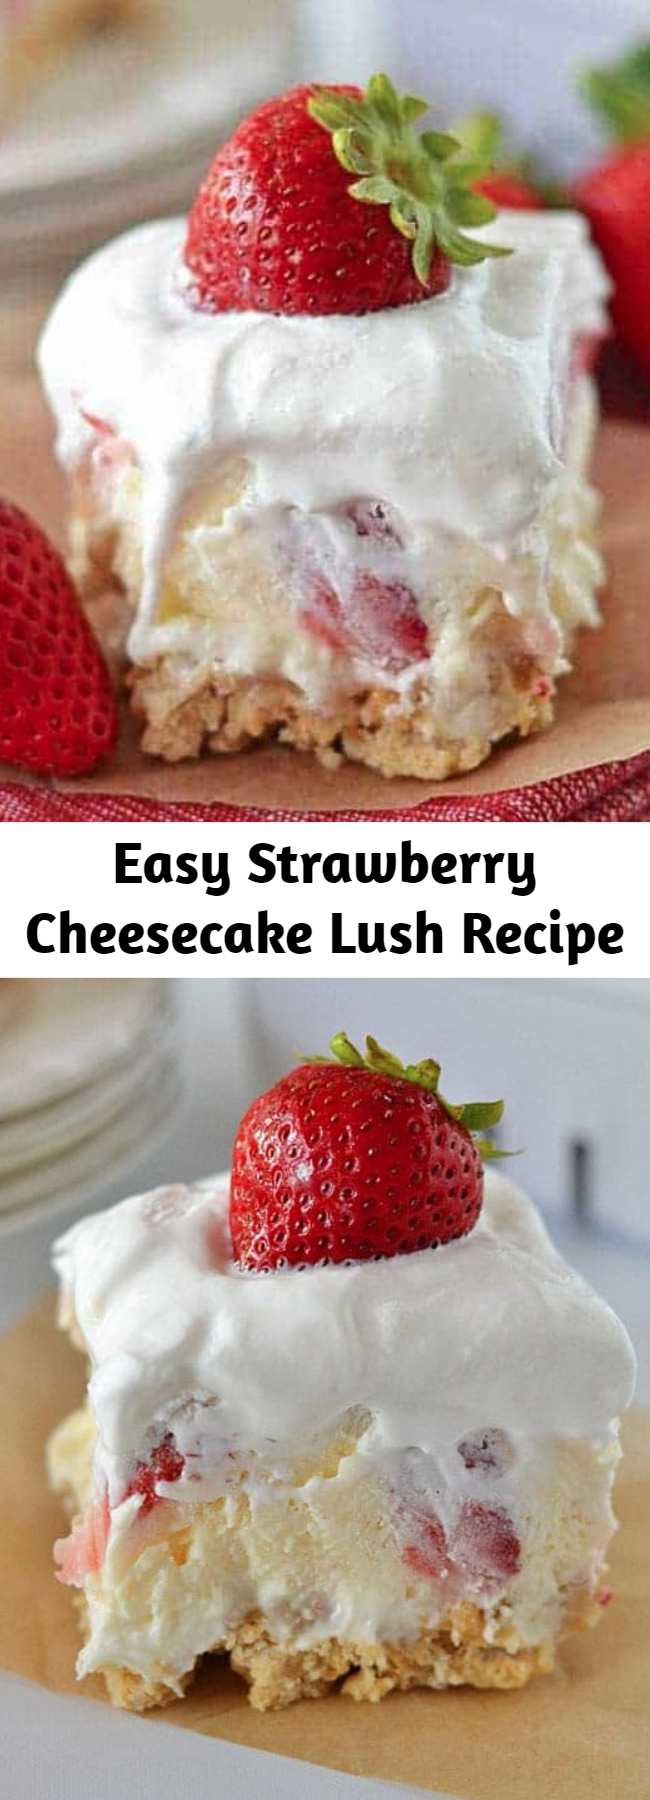 Easy Strawberry Cheesecake Lush Recipe - With layers of cream cheese, Cool Whip, cheesecake pudding and fresh strawberries, this Strawberry Cheesecake Lush will quickly become your new favorite summer dessert!